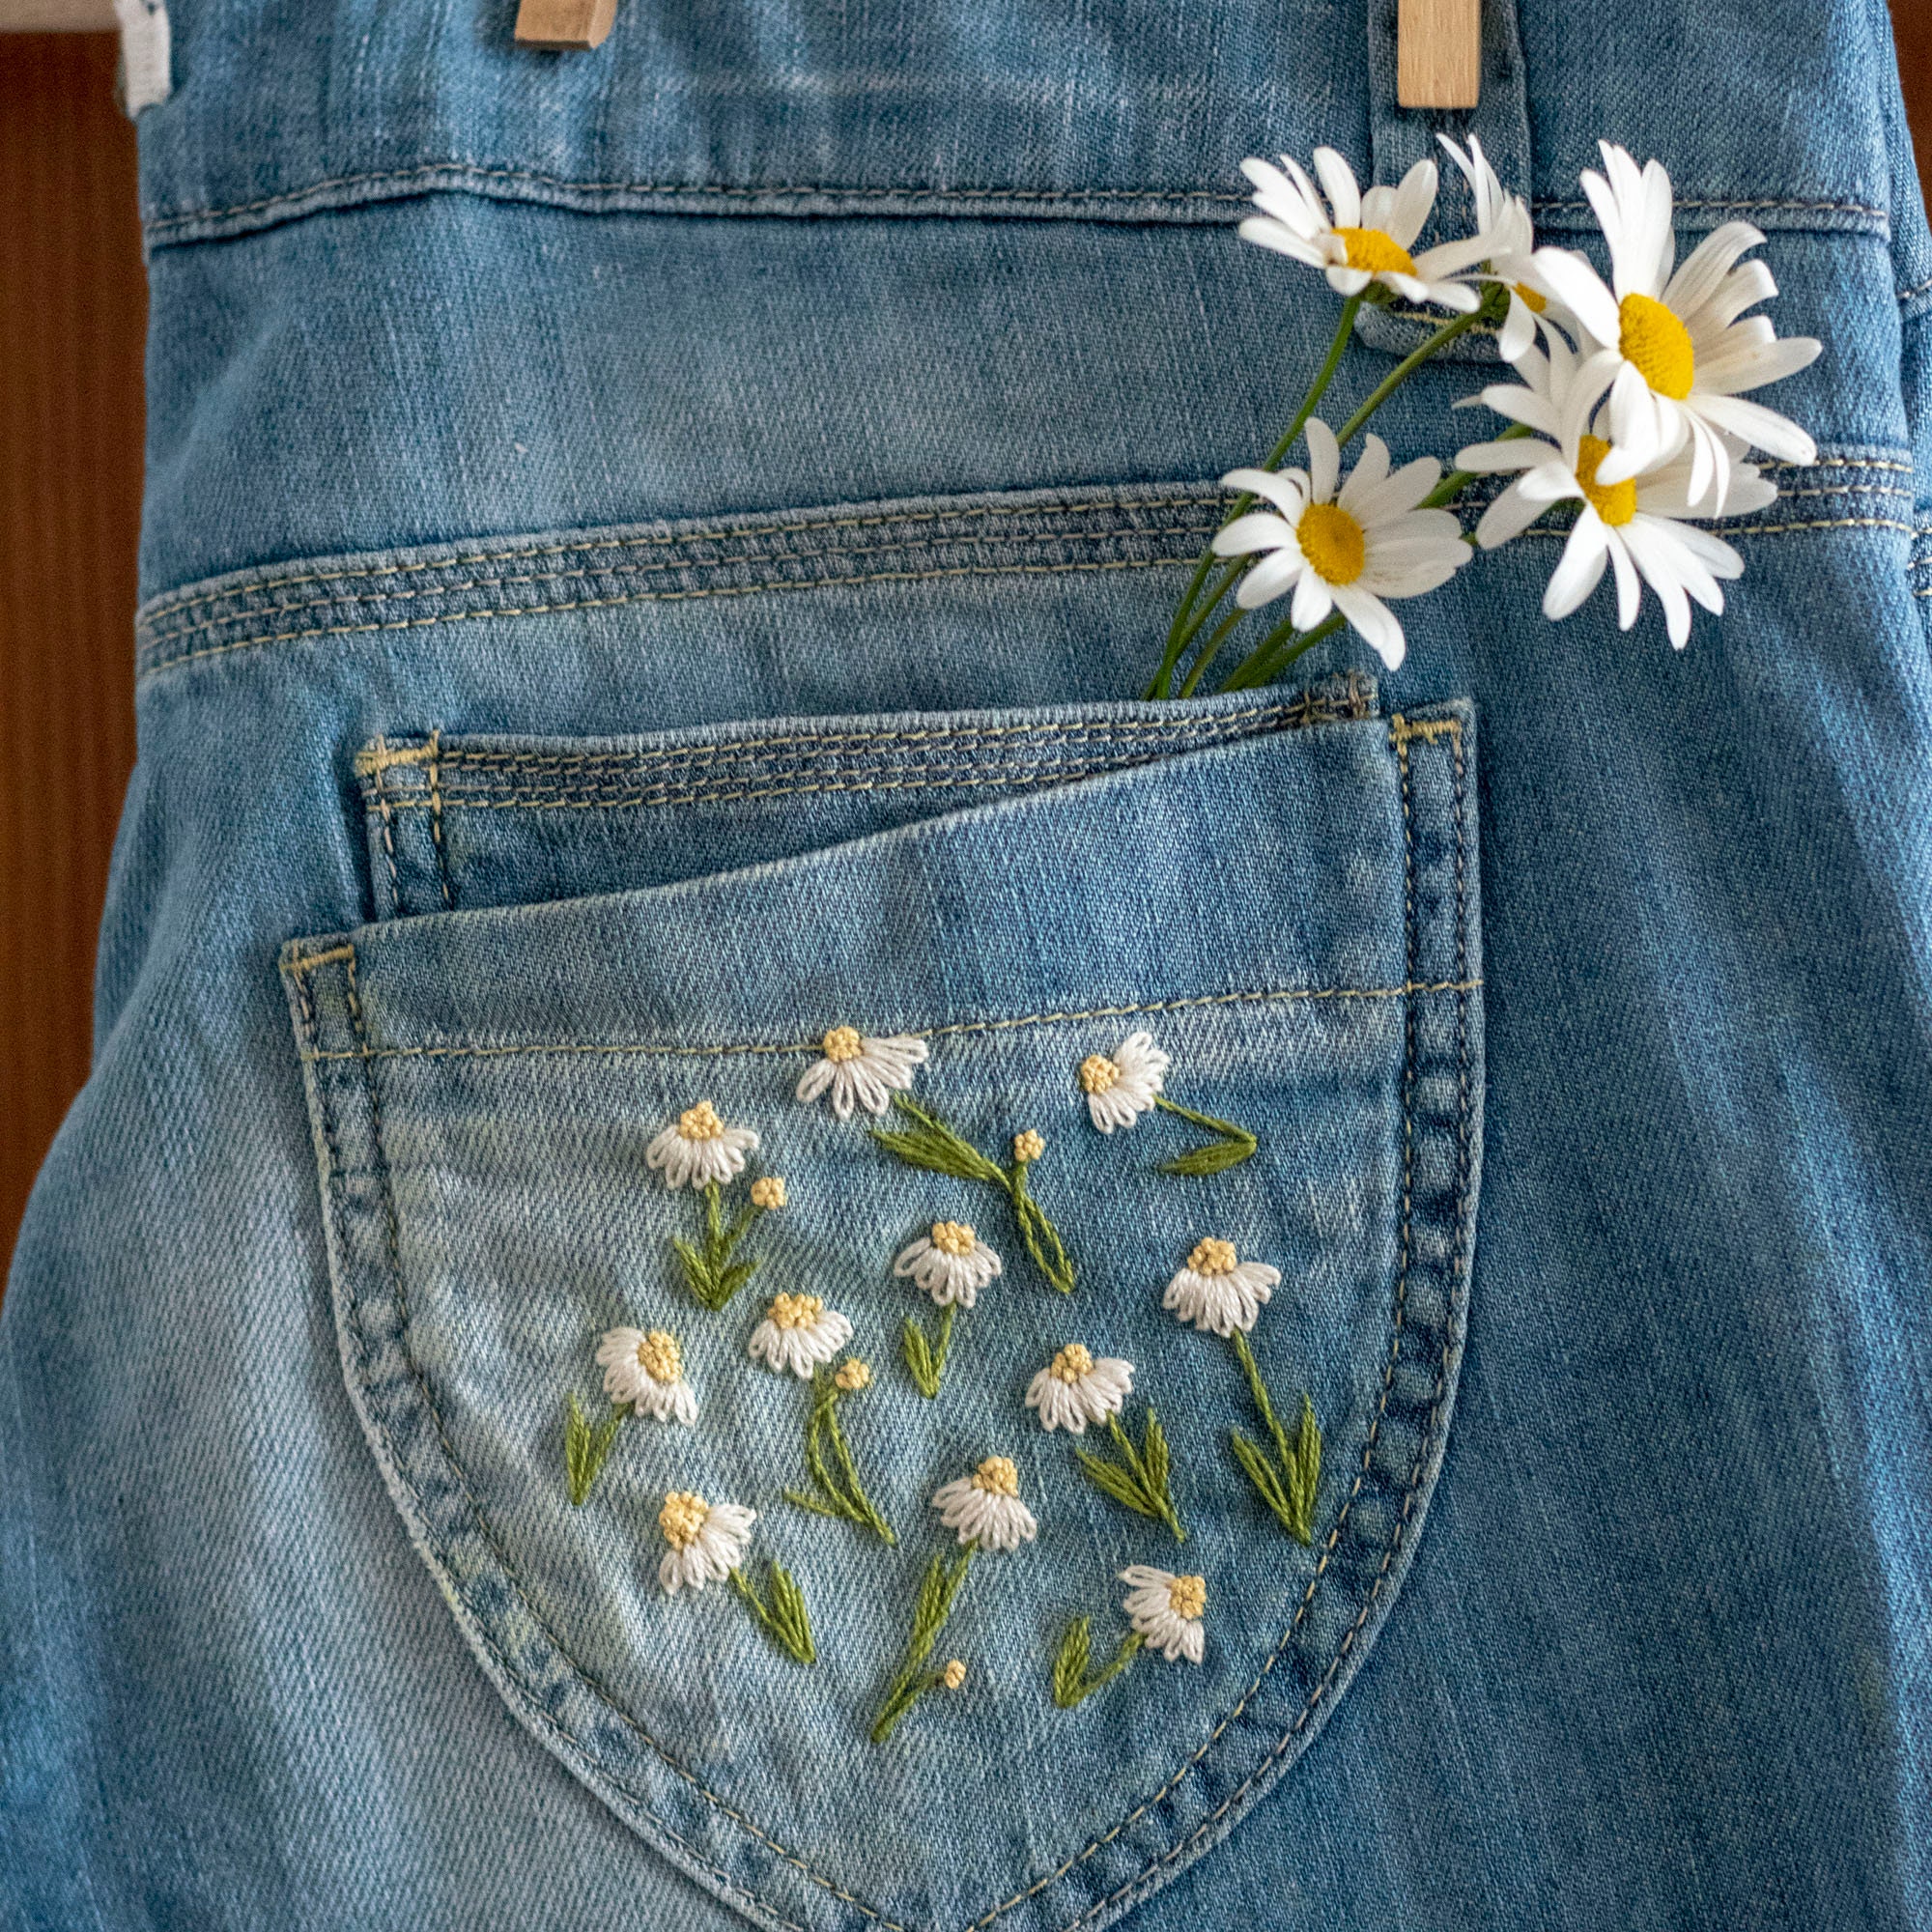 Daisies Print Embroidery Pattern Video Tutorial Begginer - Etsy